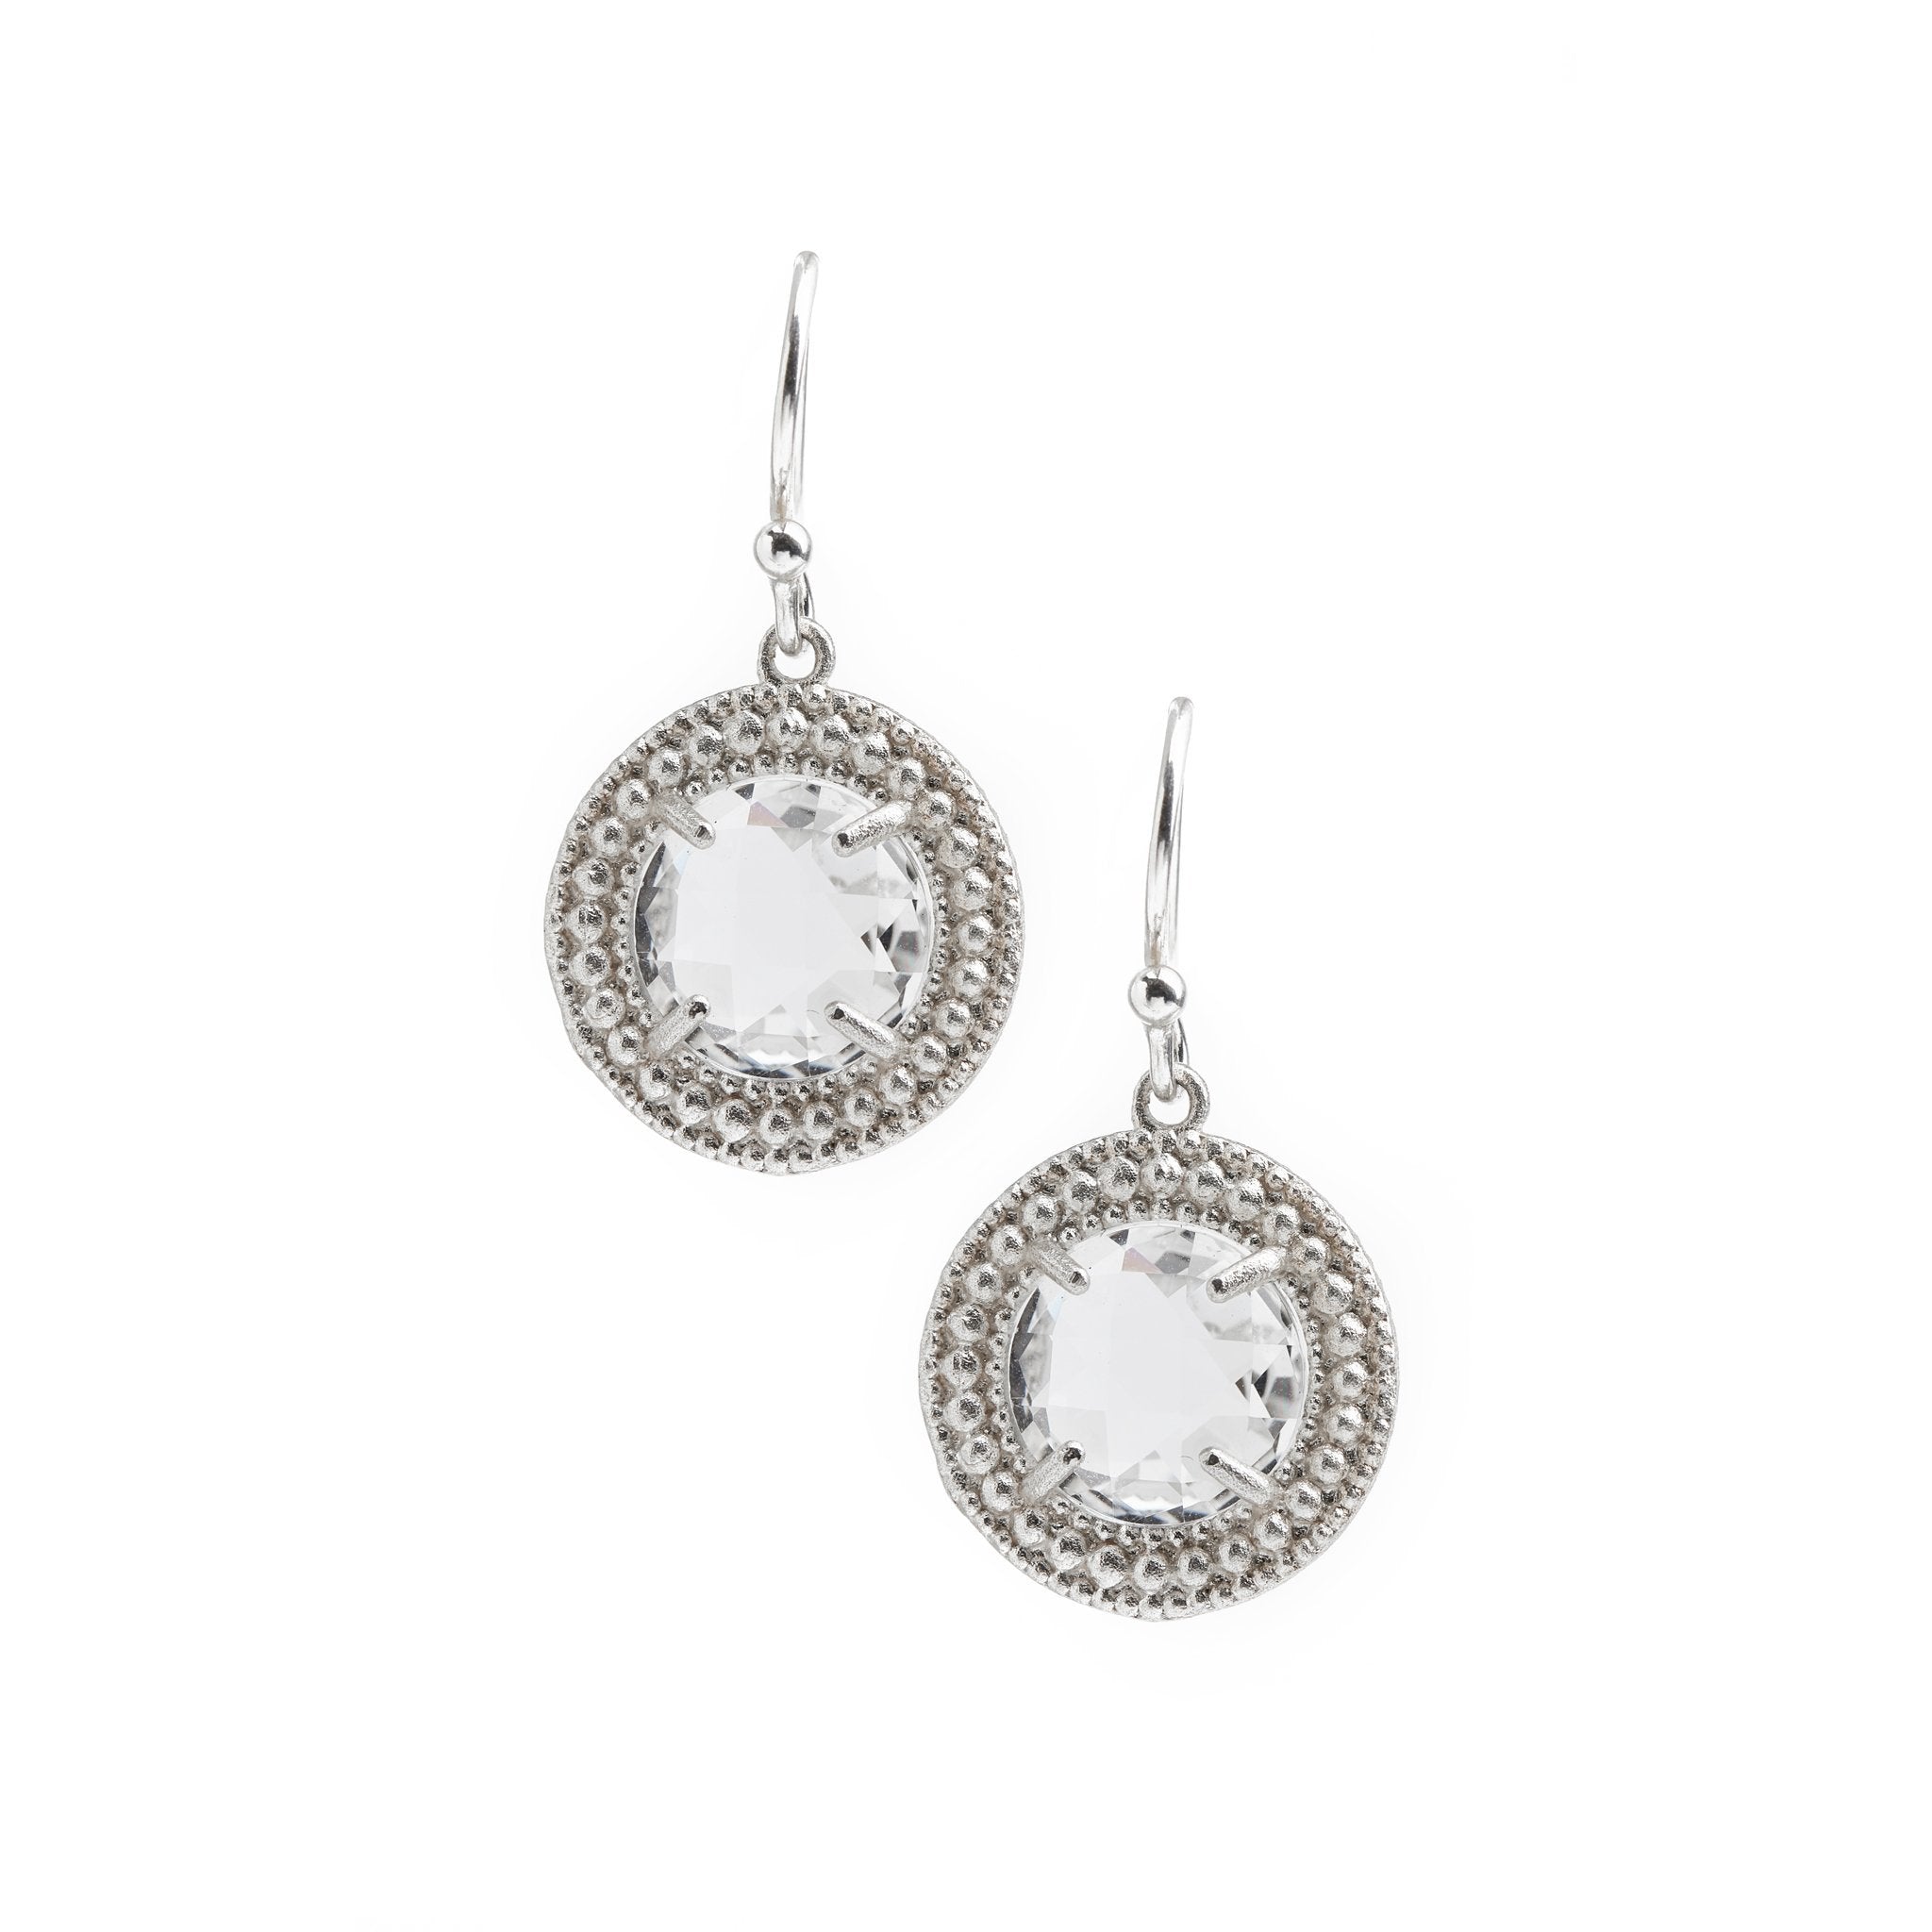 The Classic Earrings with ethical crystal quartz. - Christelle Chamberland